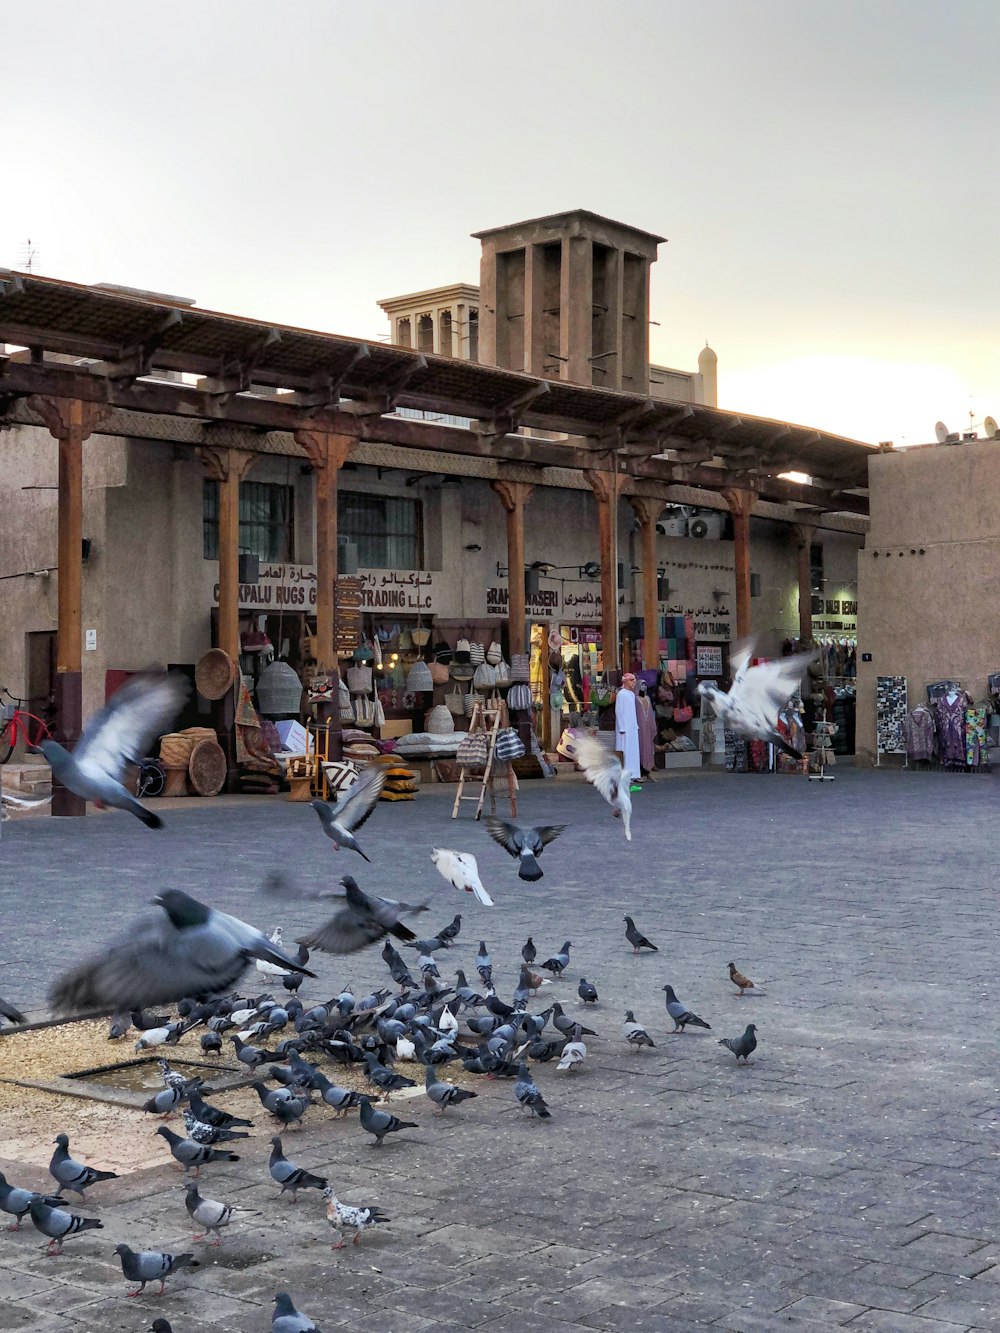 photography of pigeons during daytime